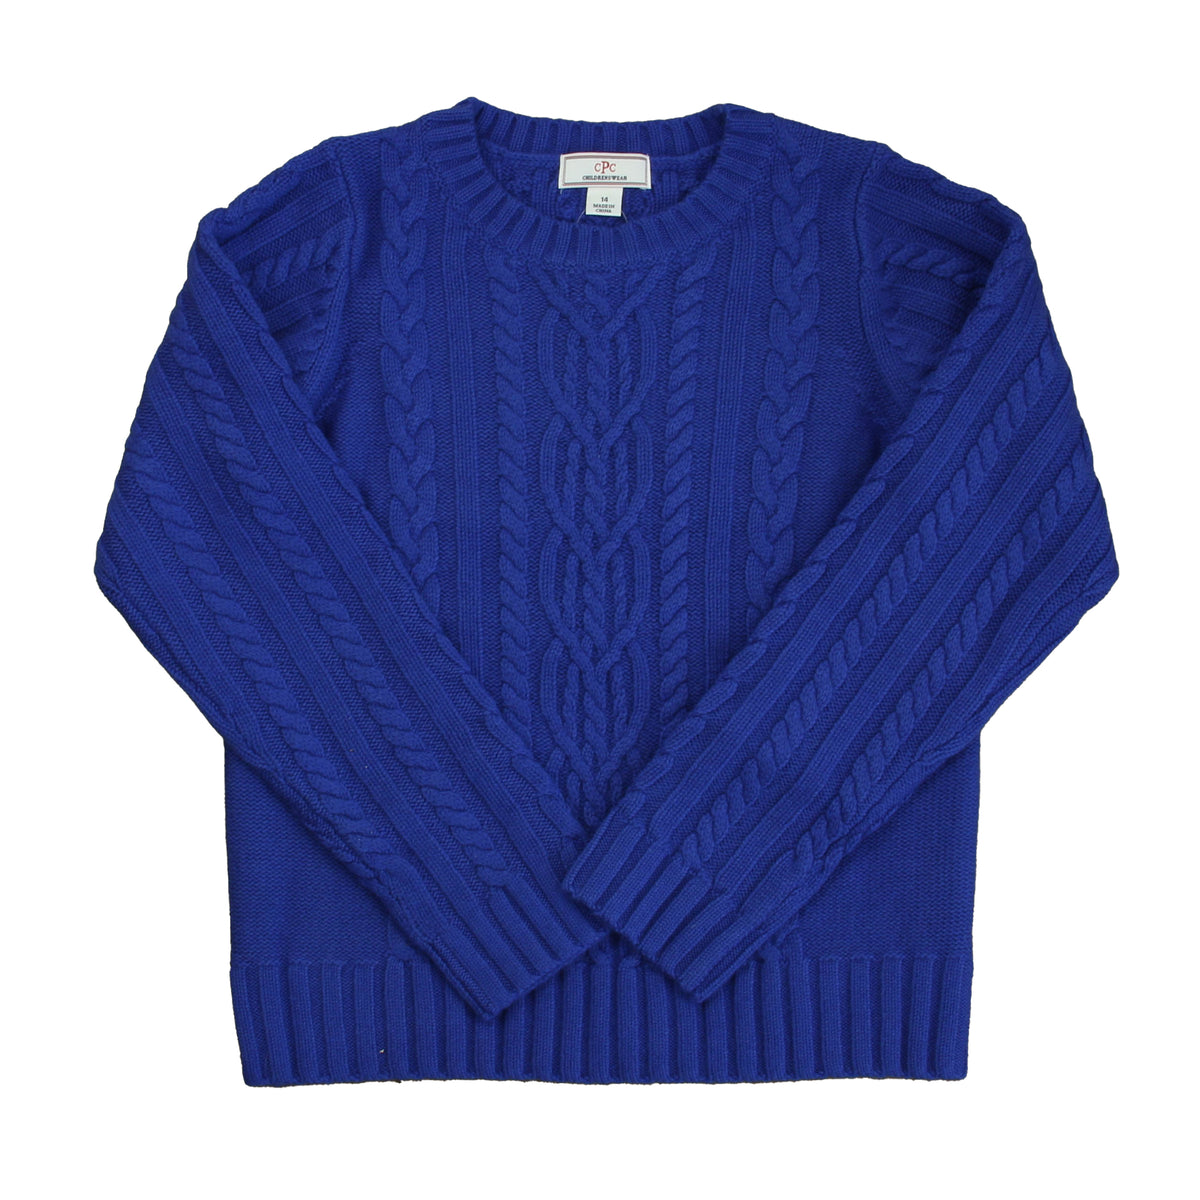 New with Tags: Luxury Blue Sweater -- FINAL SALE